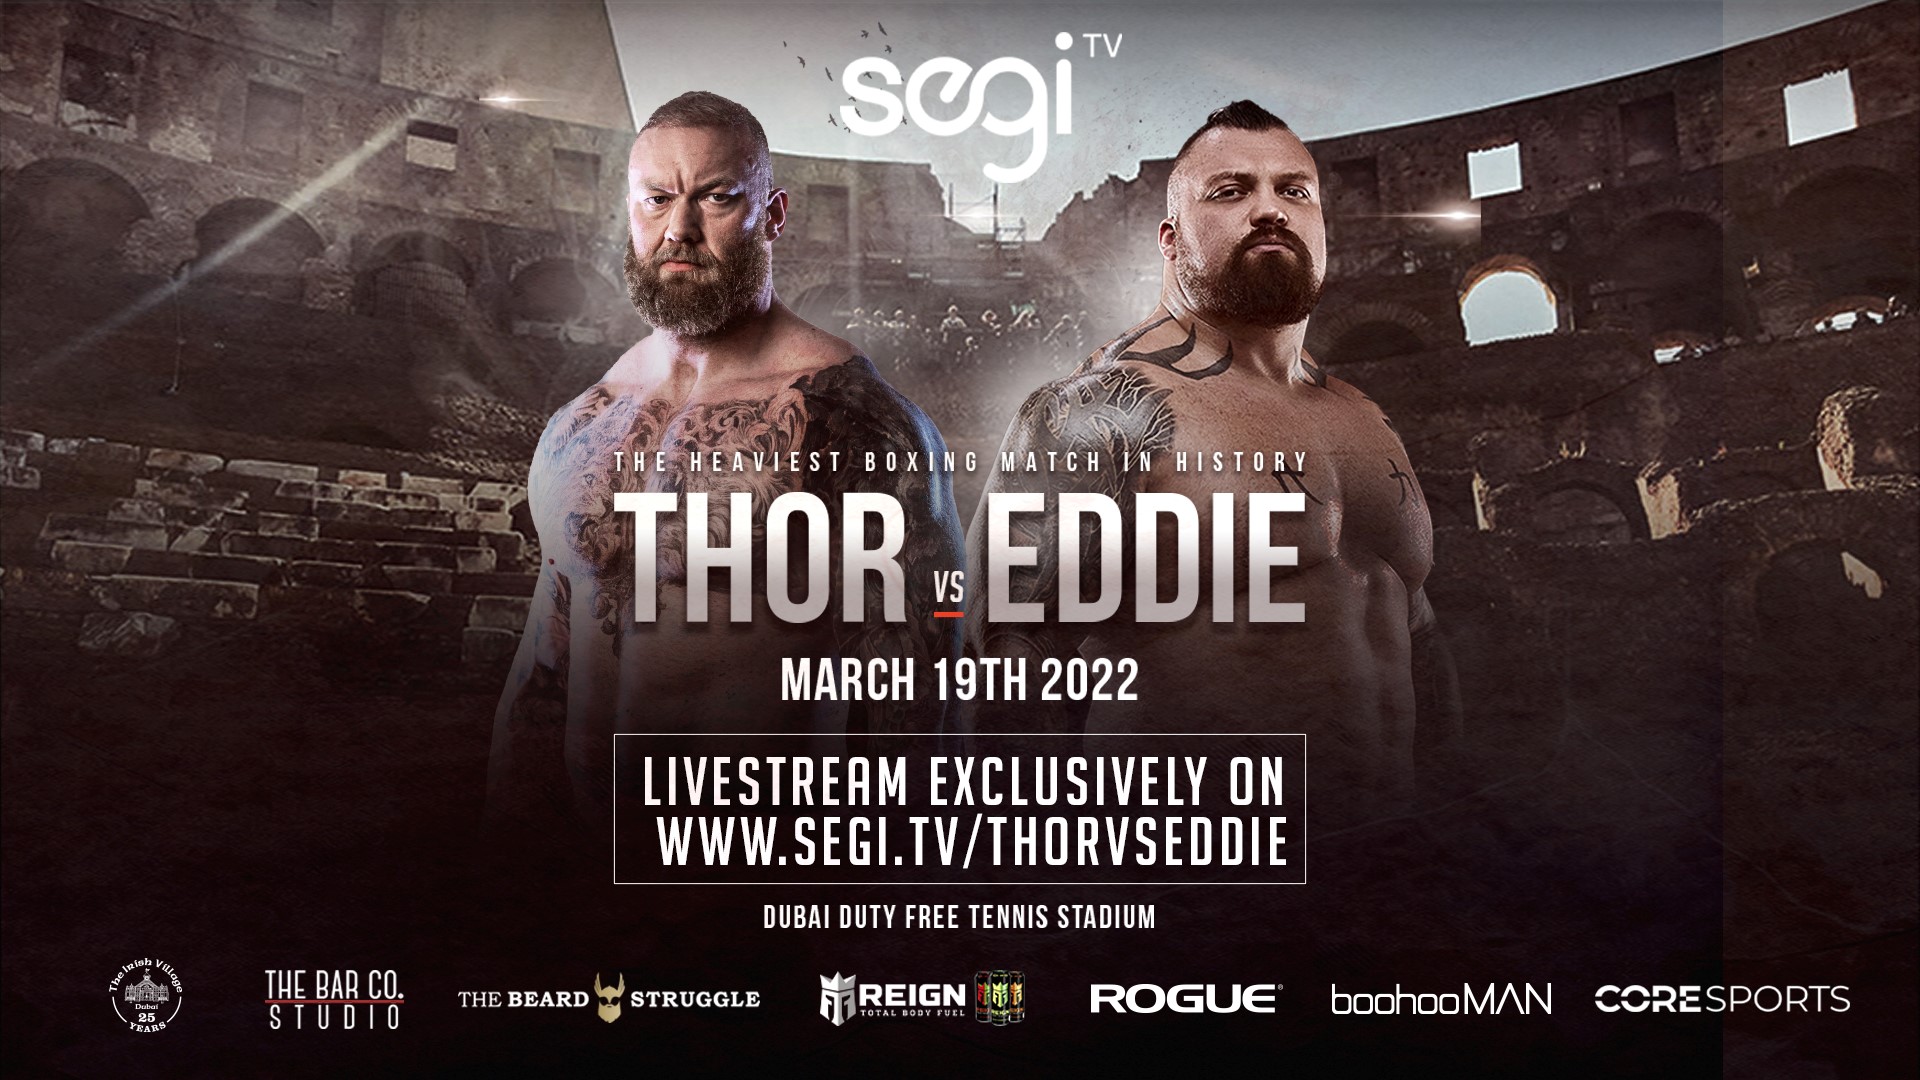 Thor vs Eddie The Heaviest Boxing Match in History